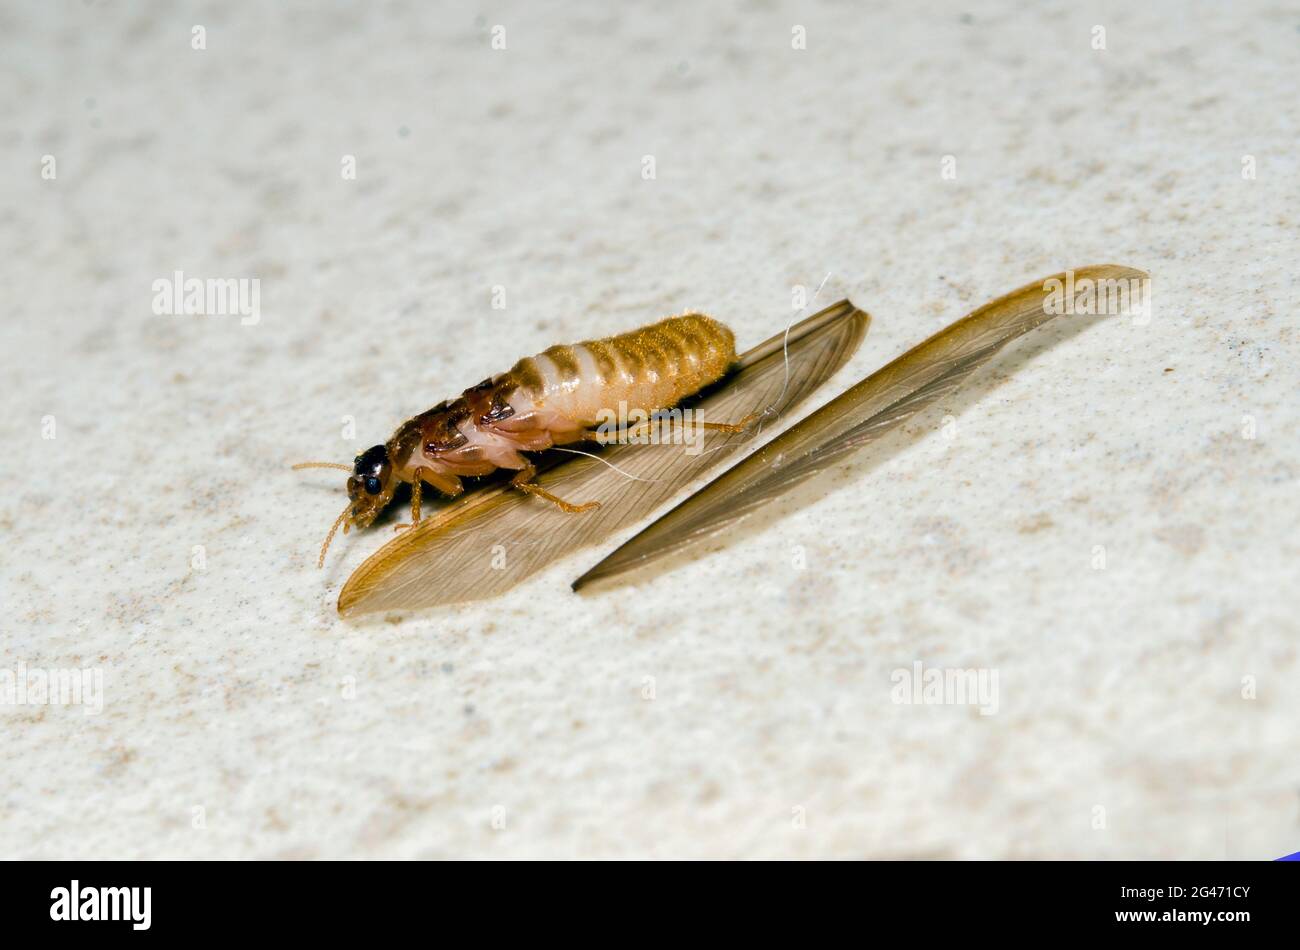 Winged male Driver Ant, Dorylus sp, with wings removed, Klungkung, Bali, Indonesia Stock Photo